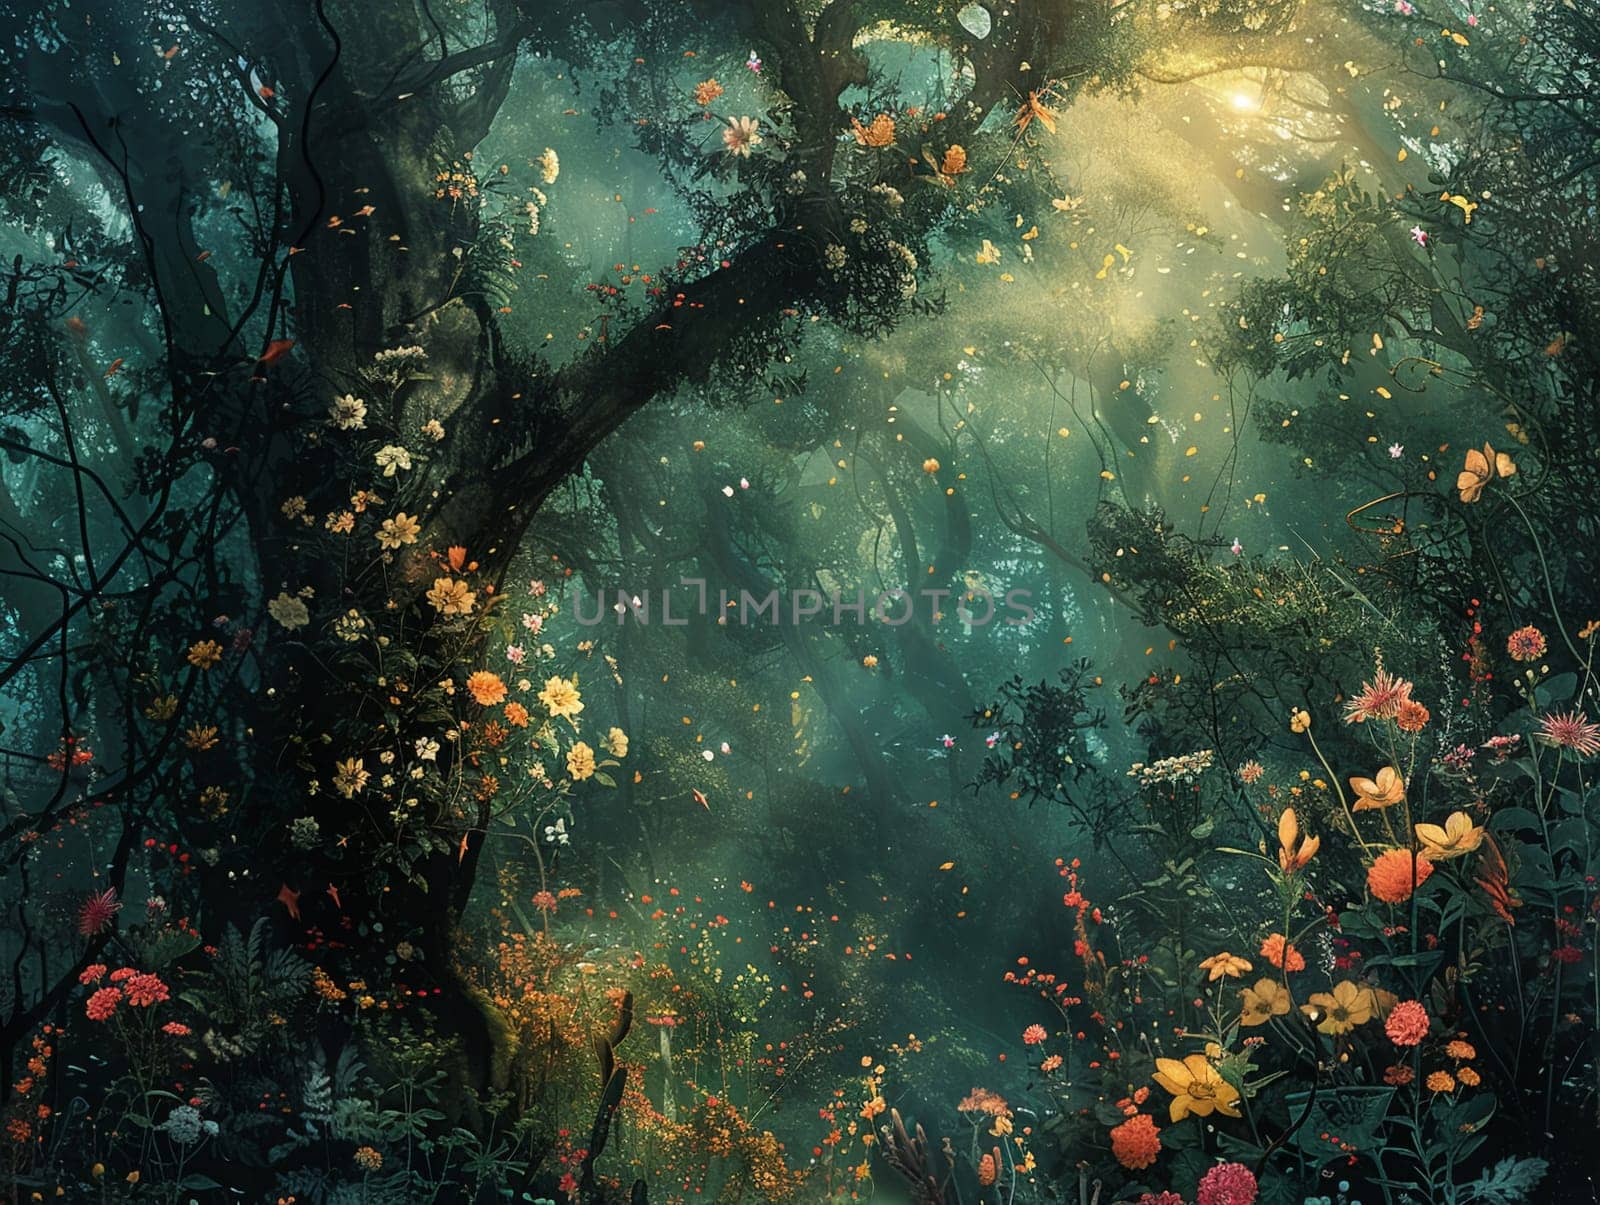 Photoshop creation of an enchanted forest by Benzoix